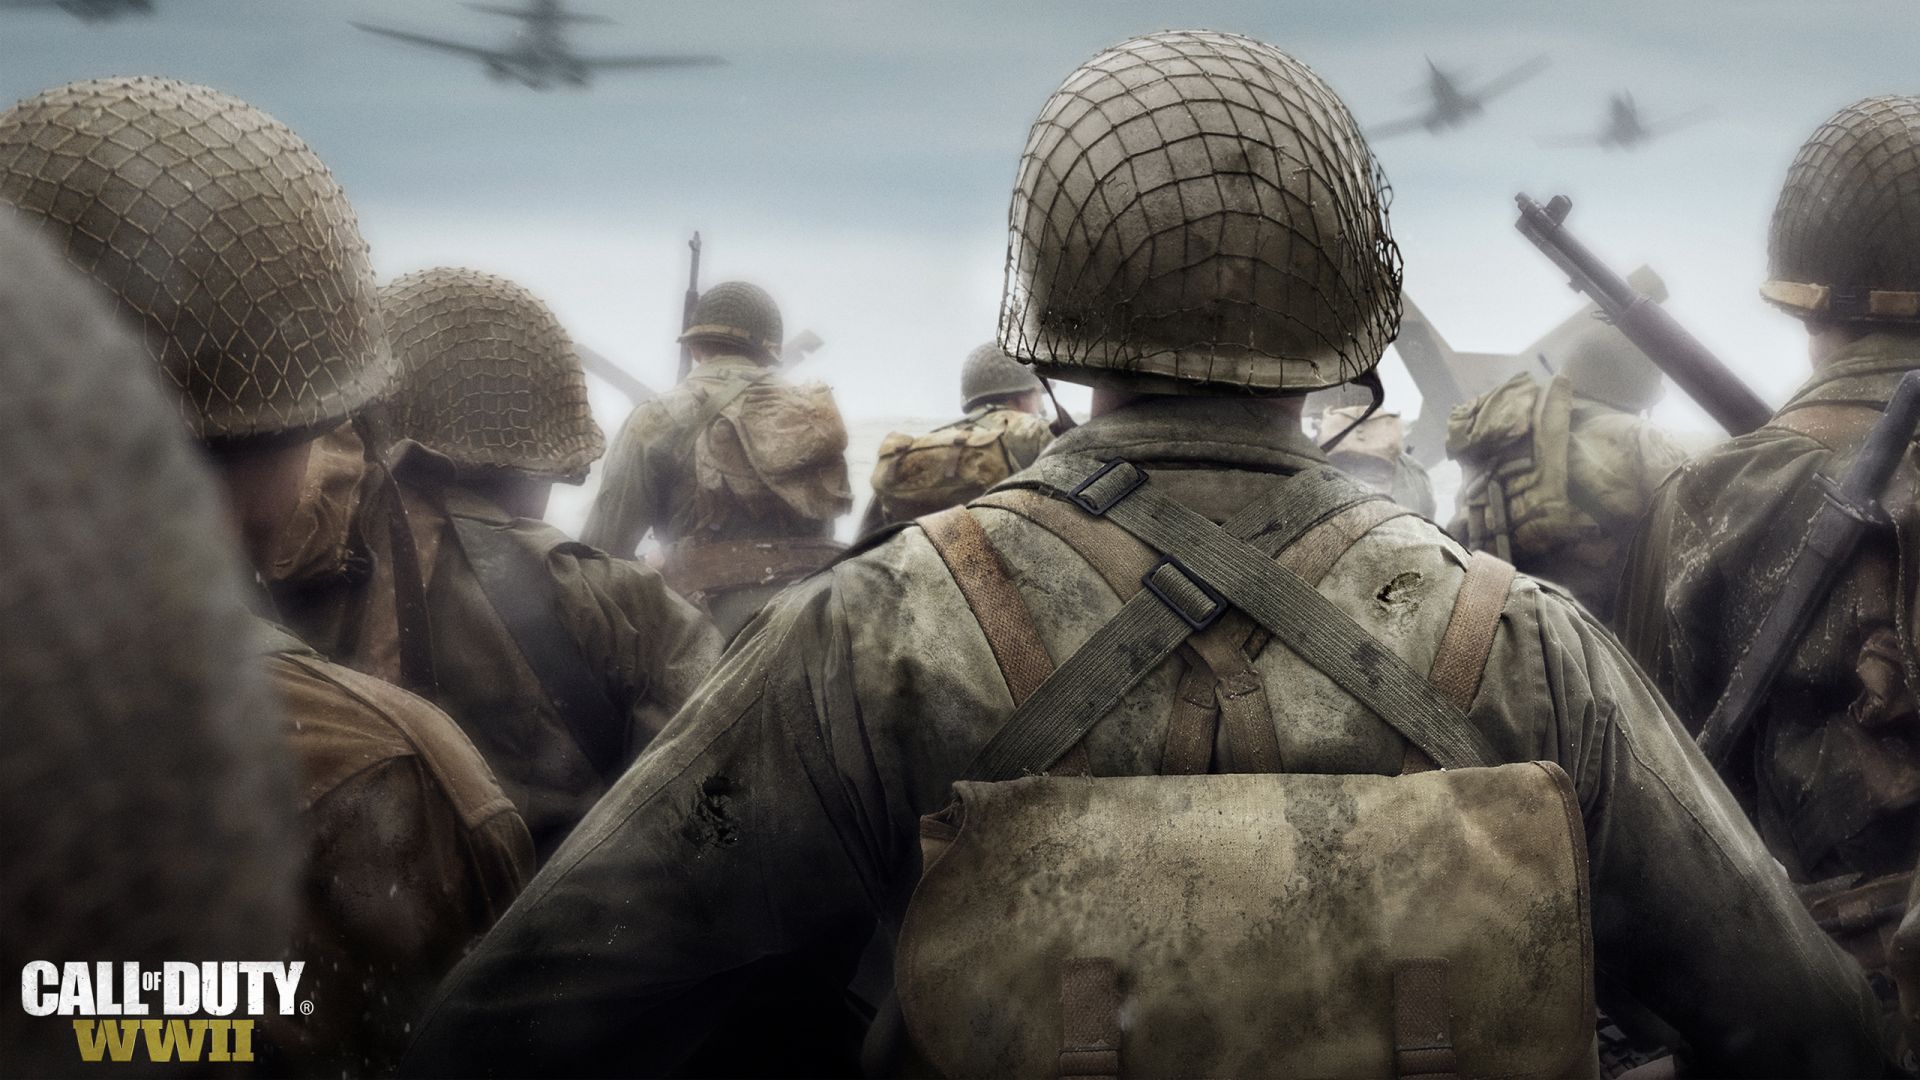 Wallpaper Call of Duty WWII, video game, soldiers